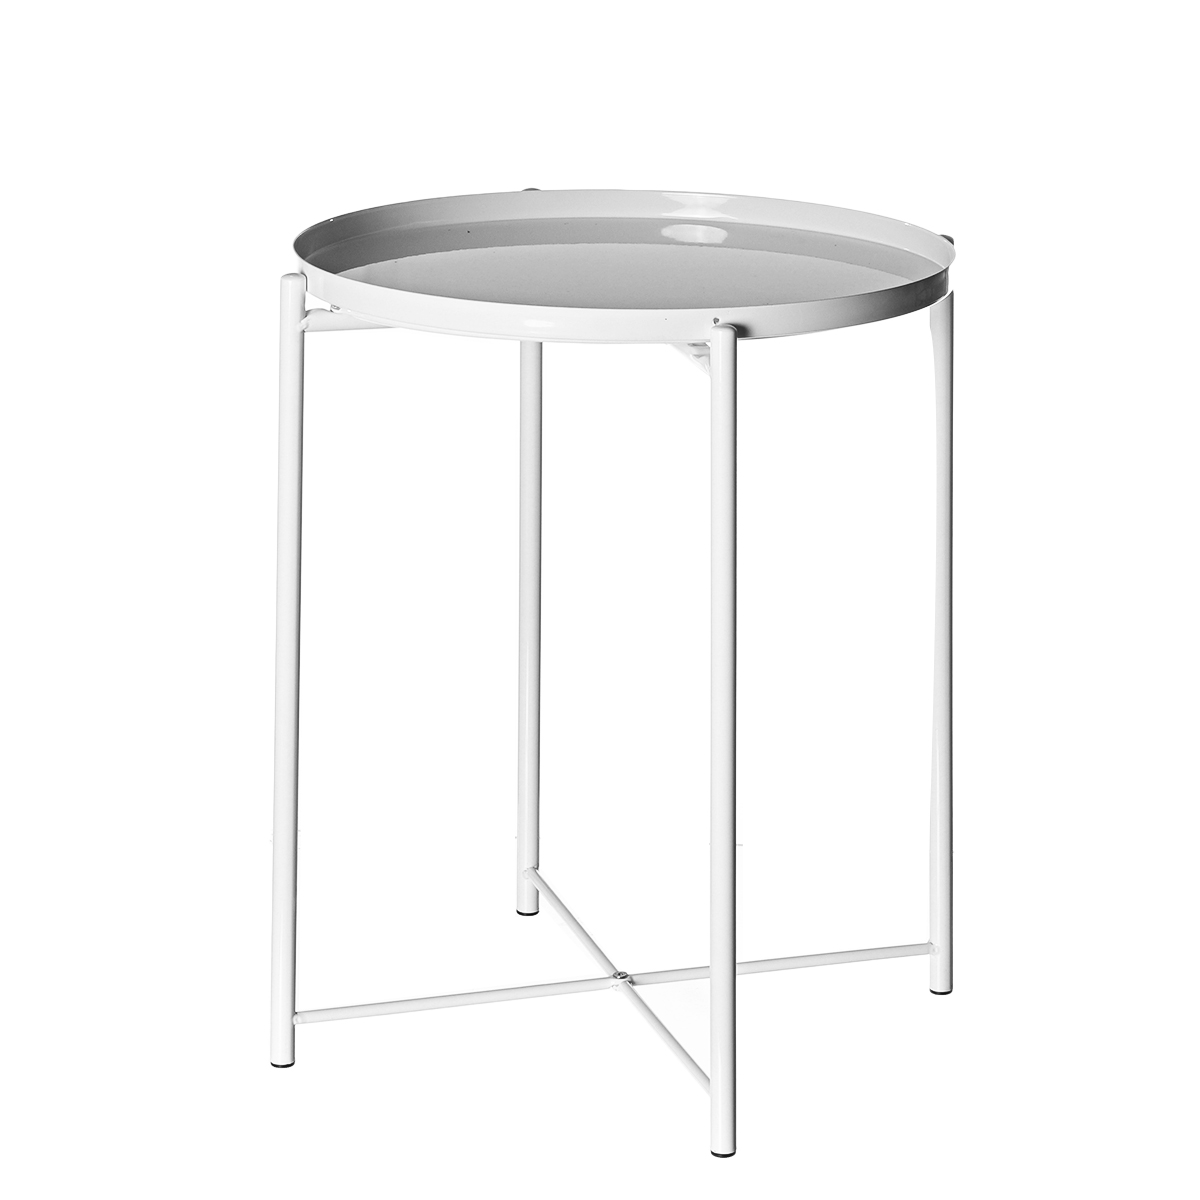 4452cm-Round-Side-End-Coffee-Table-Steel-Tray-Metal-Side-Desk-Furniture-for-Home-Bedside-Storage-Sup-1767827-8